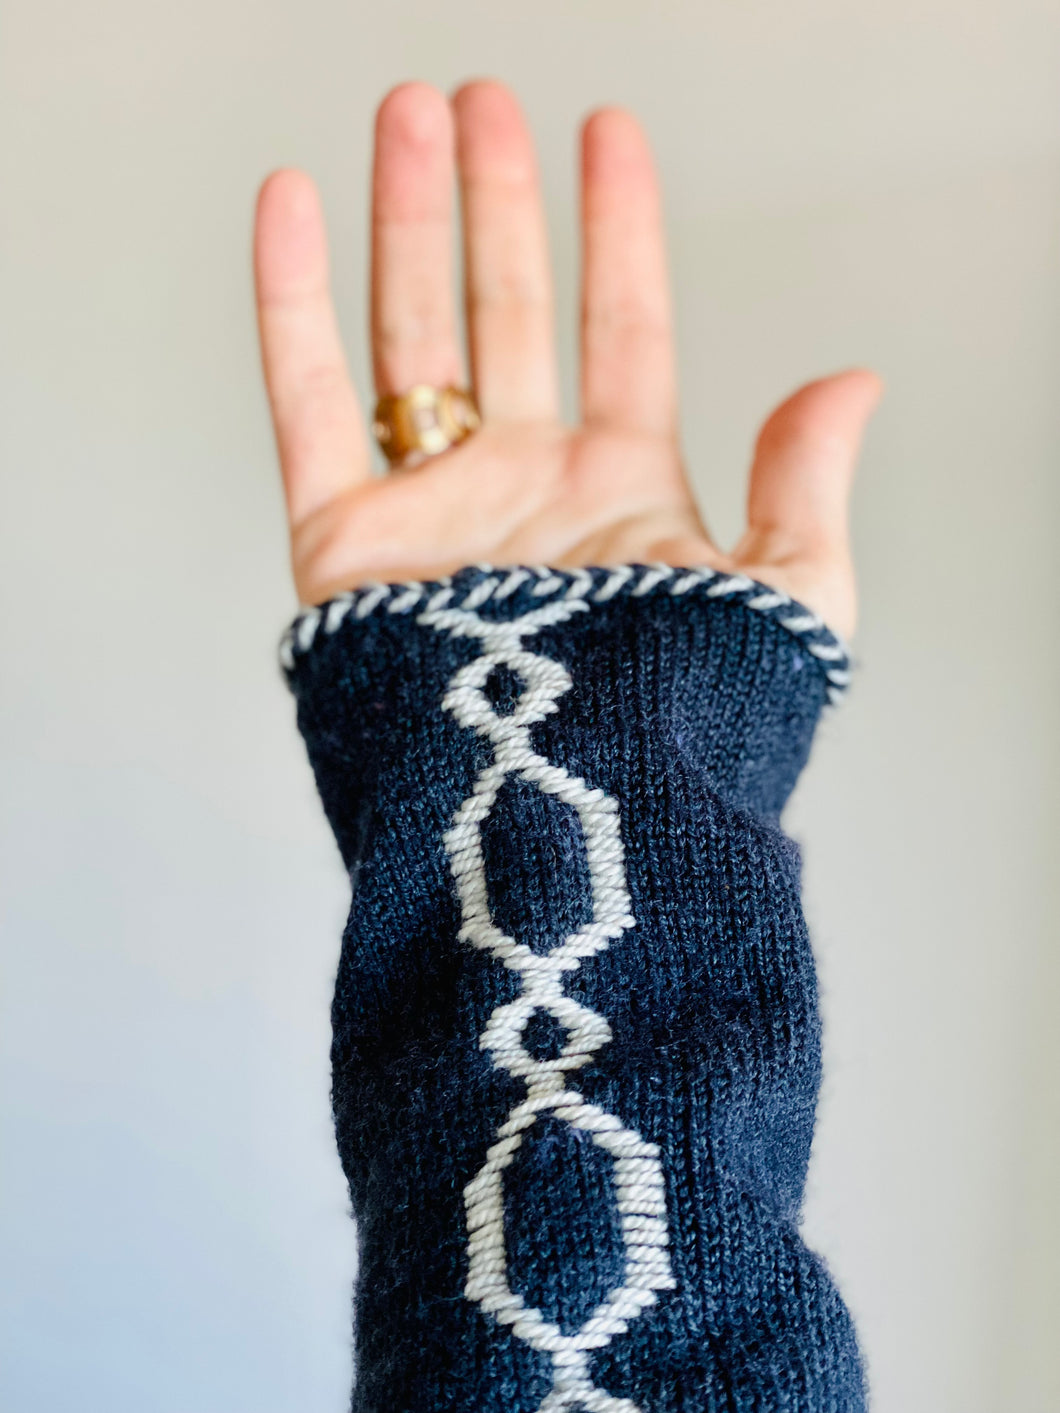 Cable 3 - An Embroidery on Knitting Motif